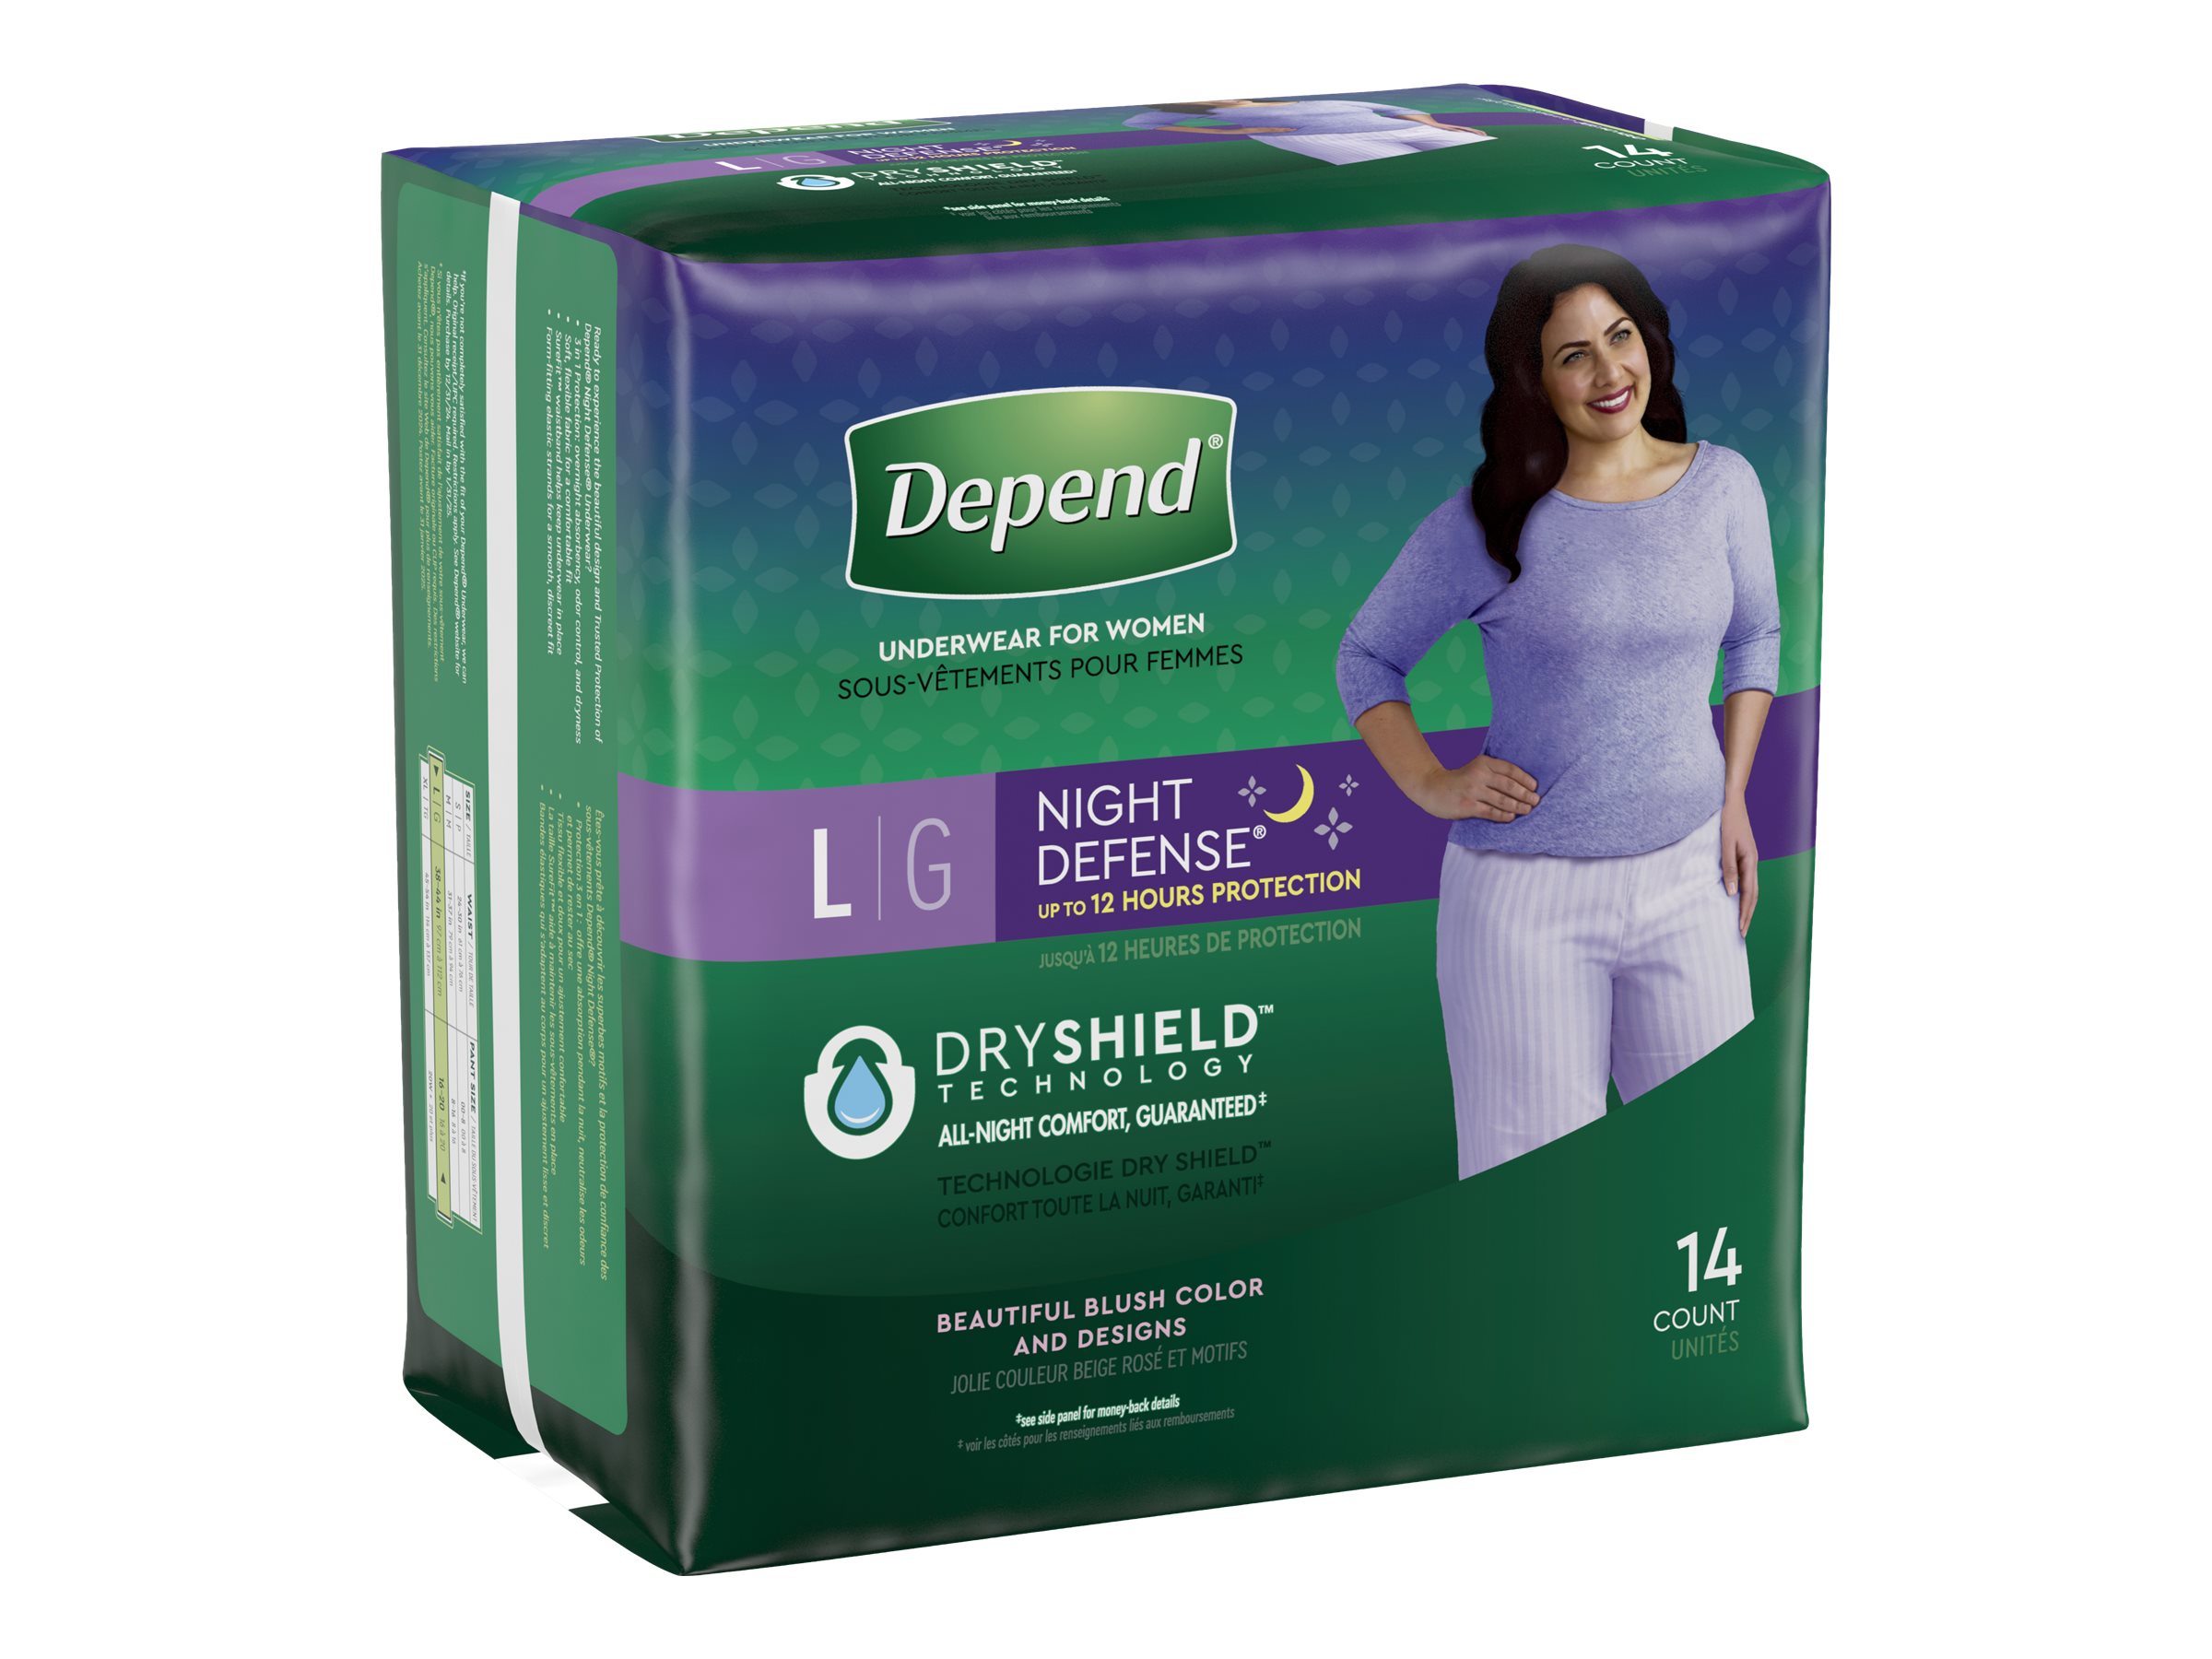 Incontinence Underwear for Men Depend Night Defense , Overnight, Size L, 14  Coun